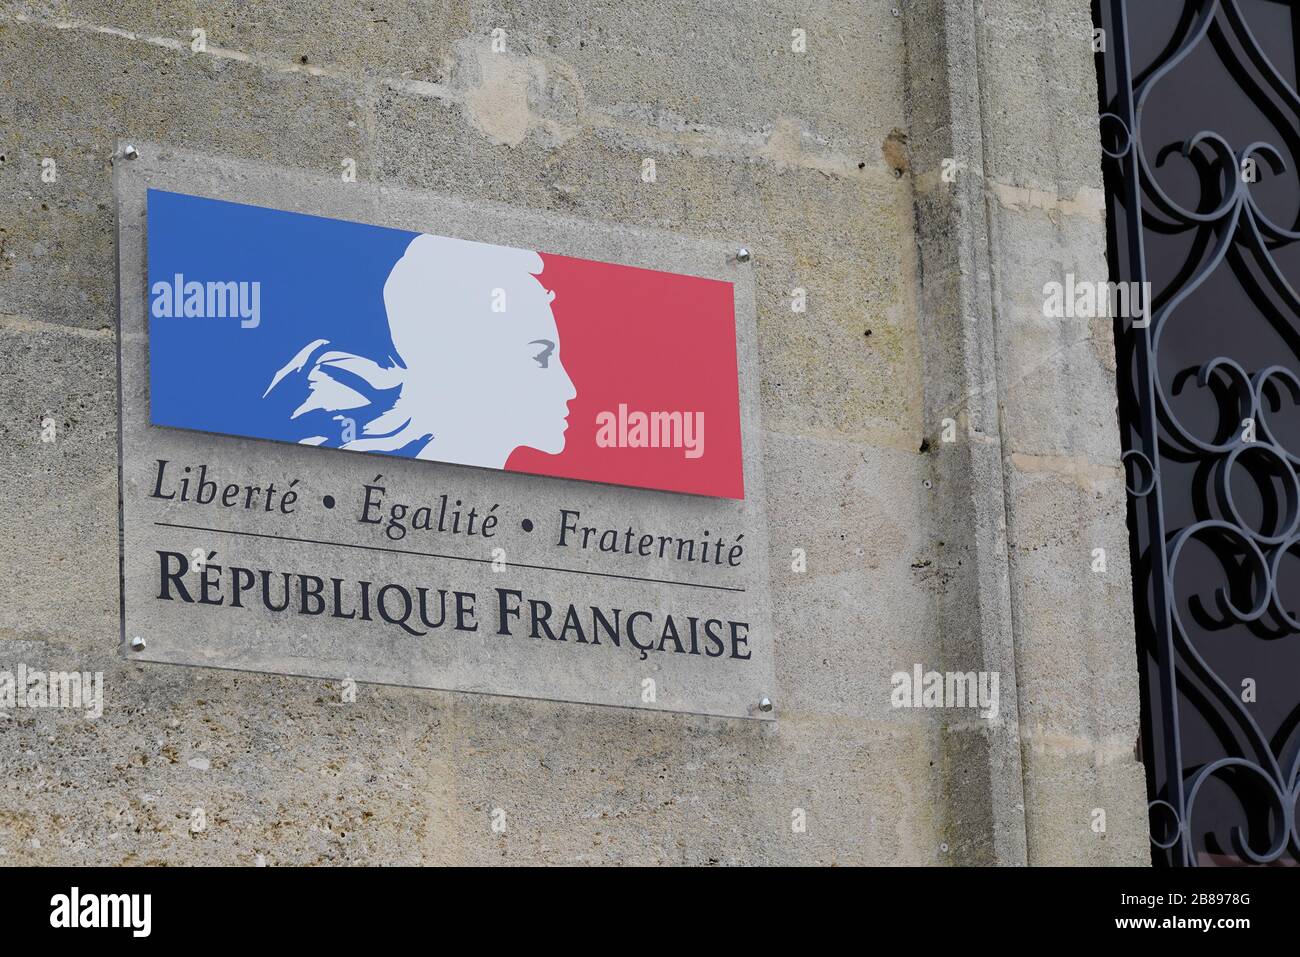 Republique Francaise sign logo France Republic freedom equality fraternity french building state institution stone ancient wall Stock Photo